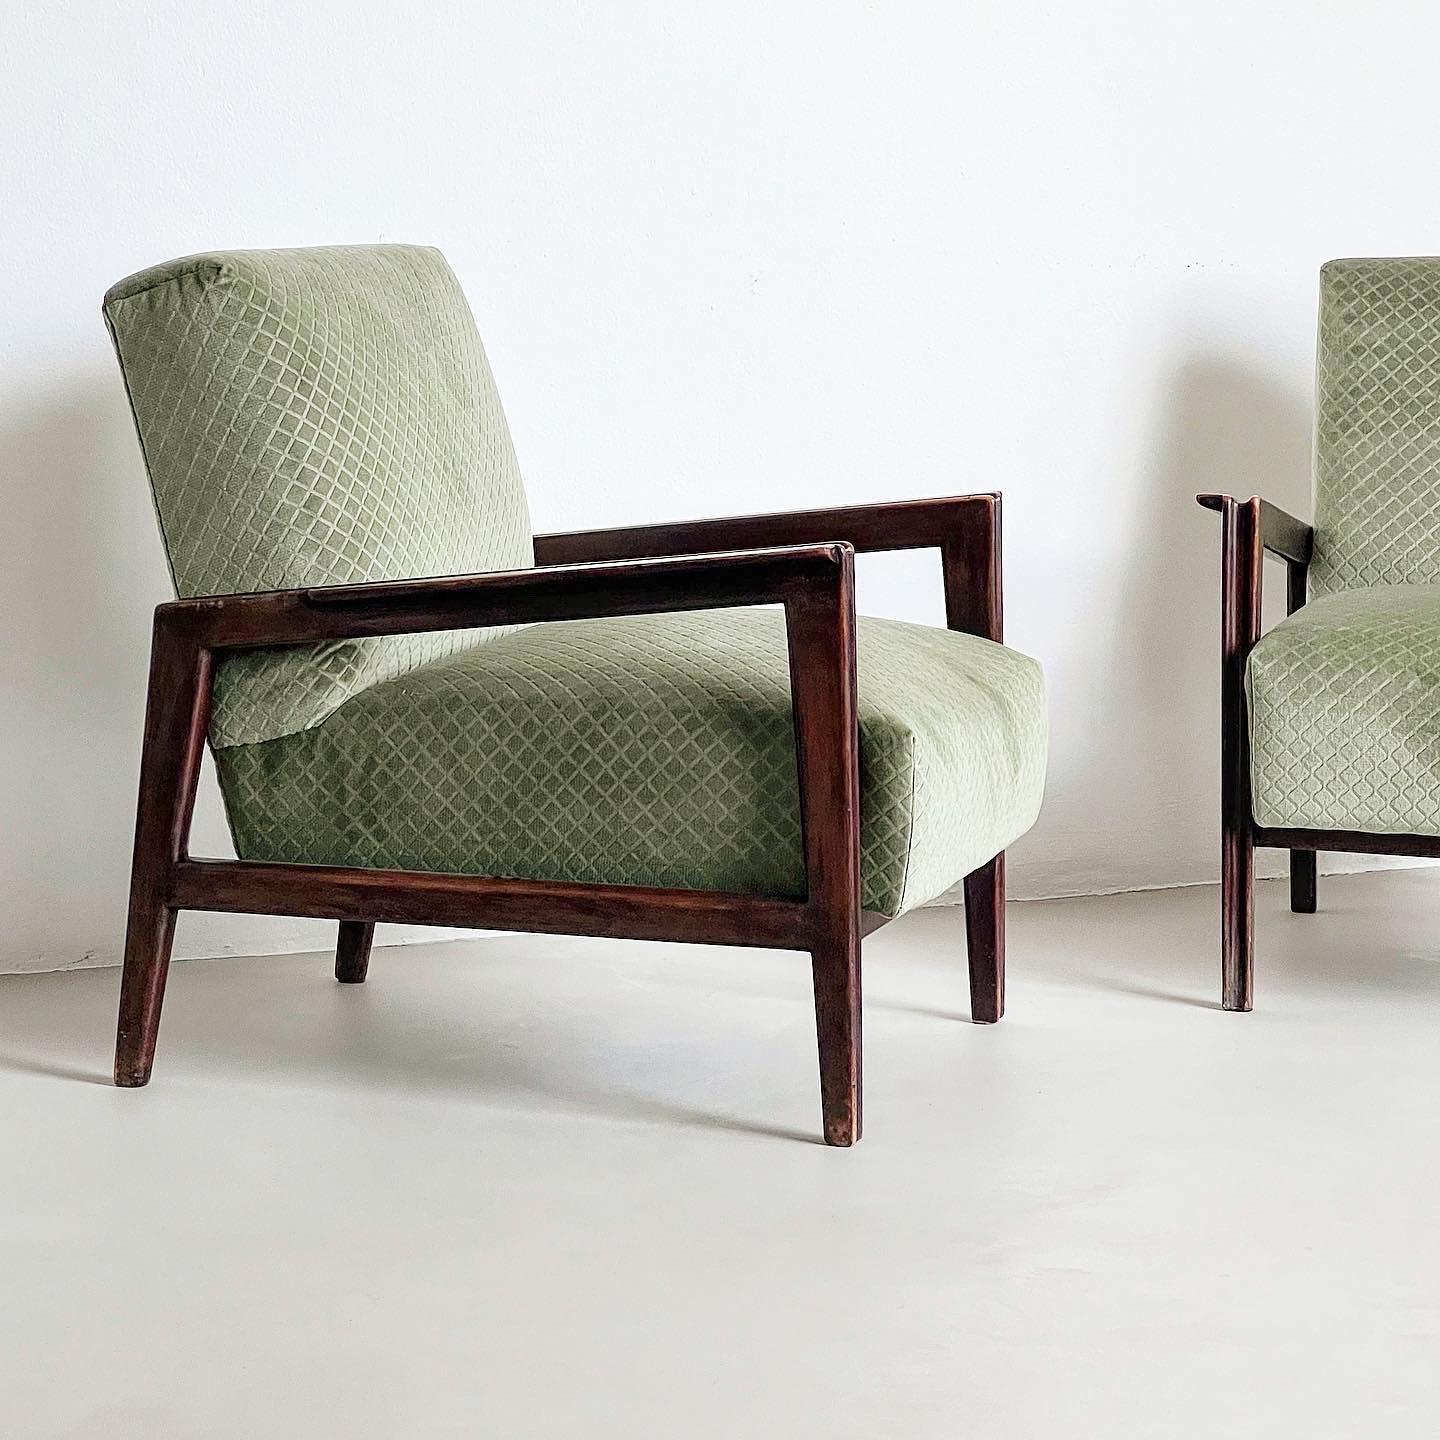 Coming from the headquarters of an insurance company, this set of two Mid-Century Modern armchairs is stunning in all aspects! The walnut frame, preserved in untouched original conditions, shows a warm patina of the time. It's partially uneven, but